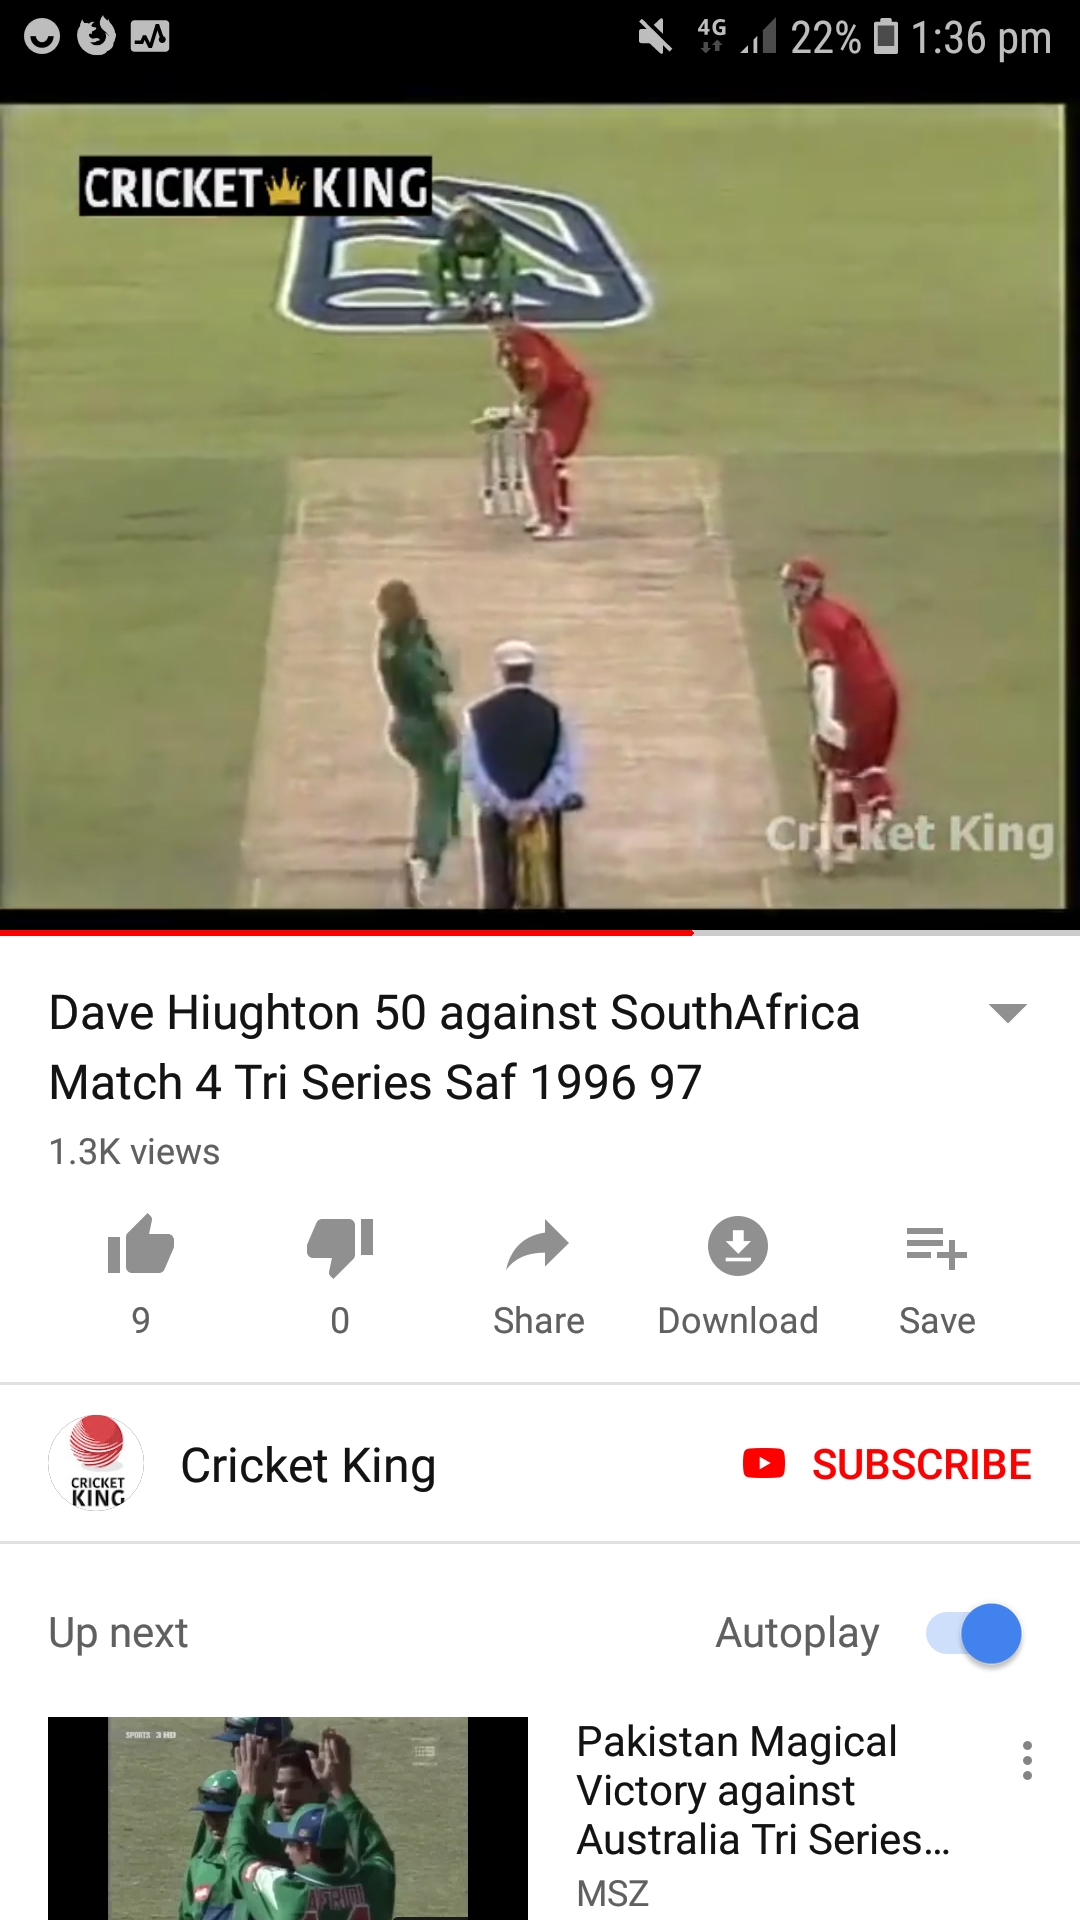 Dave houghton 50 vs south africa